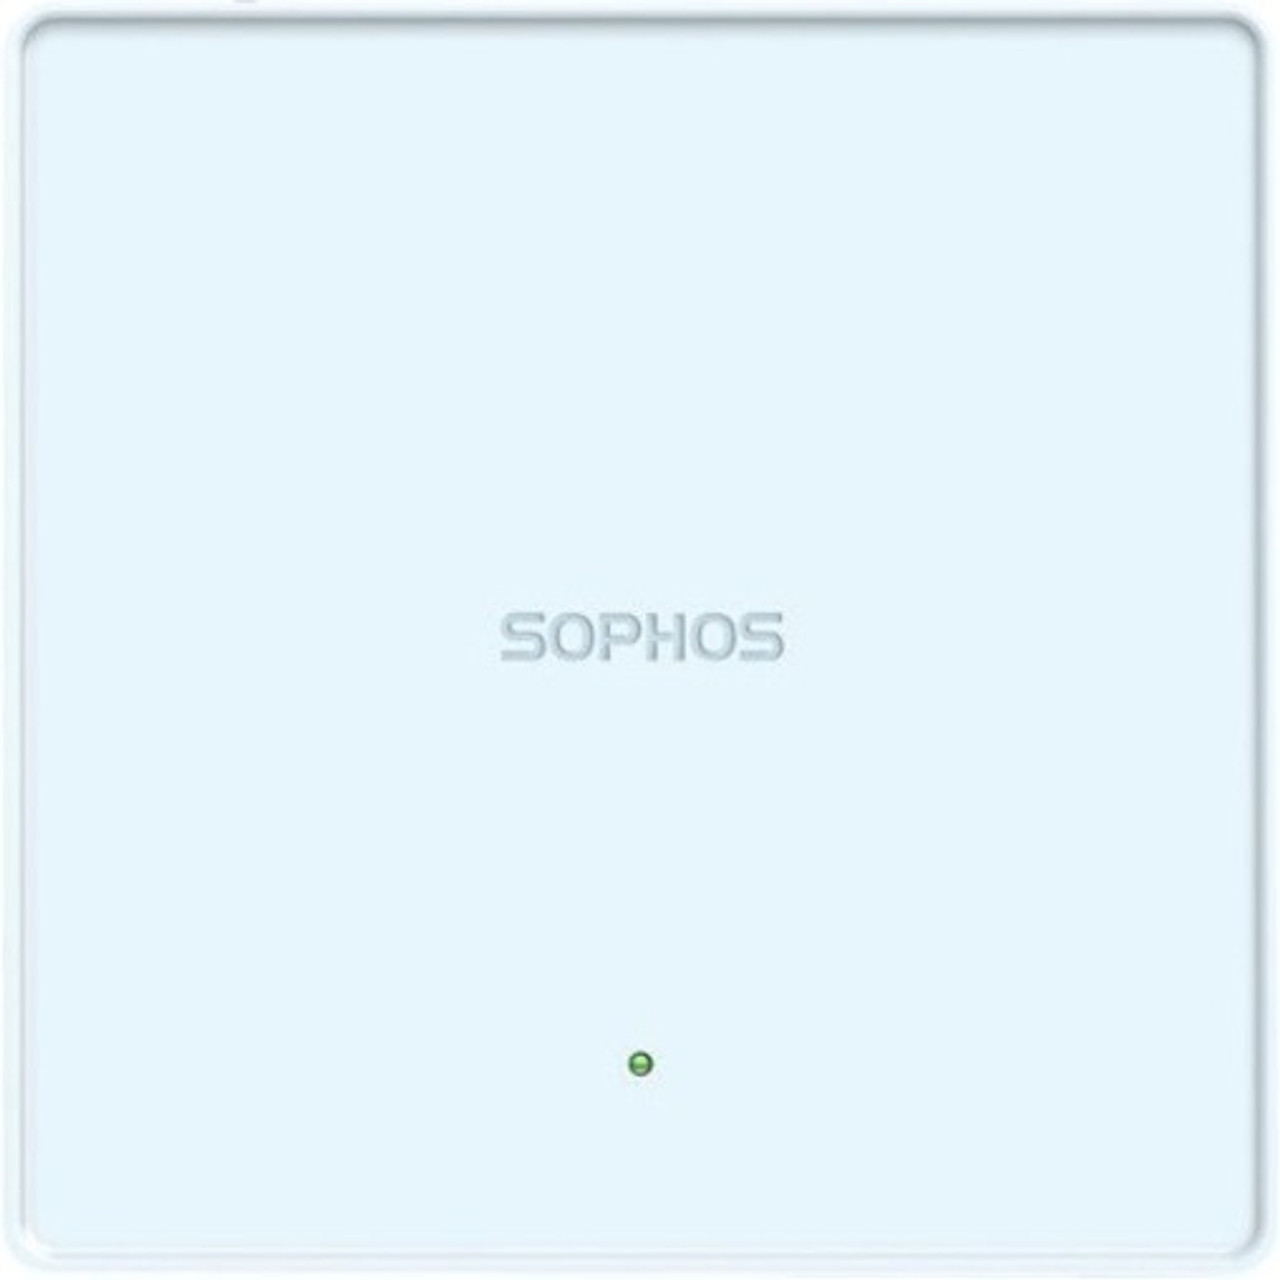 Sophos 740 Dual Band IEEE 802.11 a/b/g/n/ac 1.69 Gbit/s Wireless Access Point - Indoor - A740TCHNP